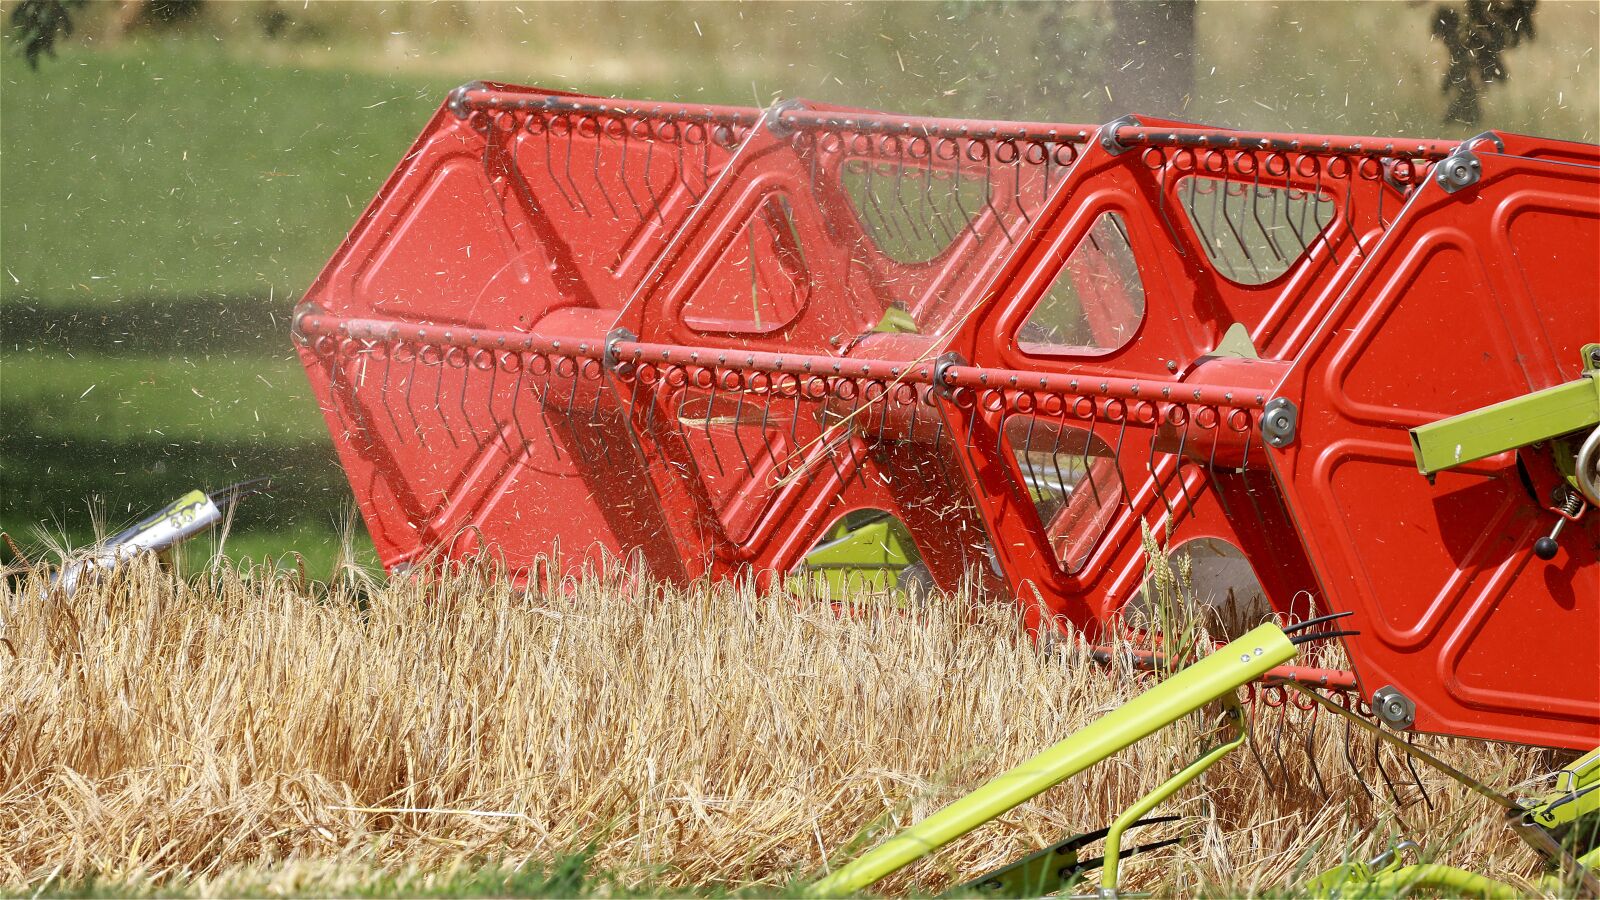 150-600mm F5-6.3 DG OS HSM | Contemporary 015 sample photo. Harvest, combine harvester, agriculture photography